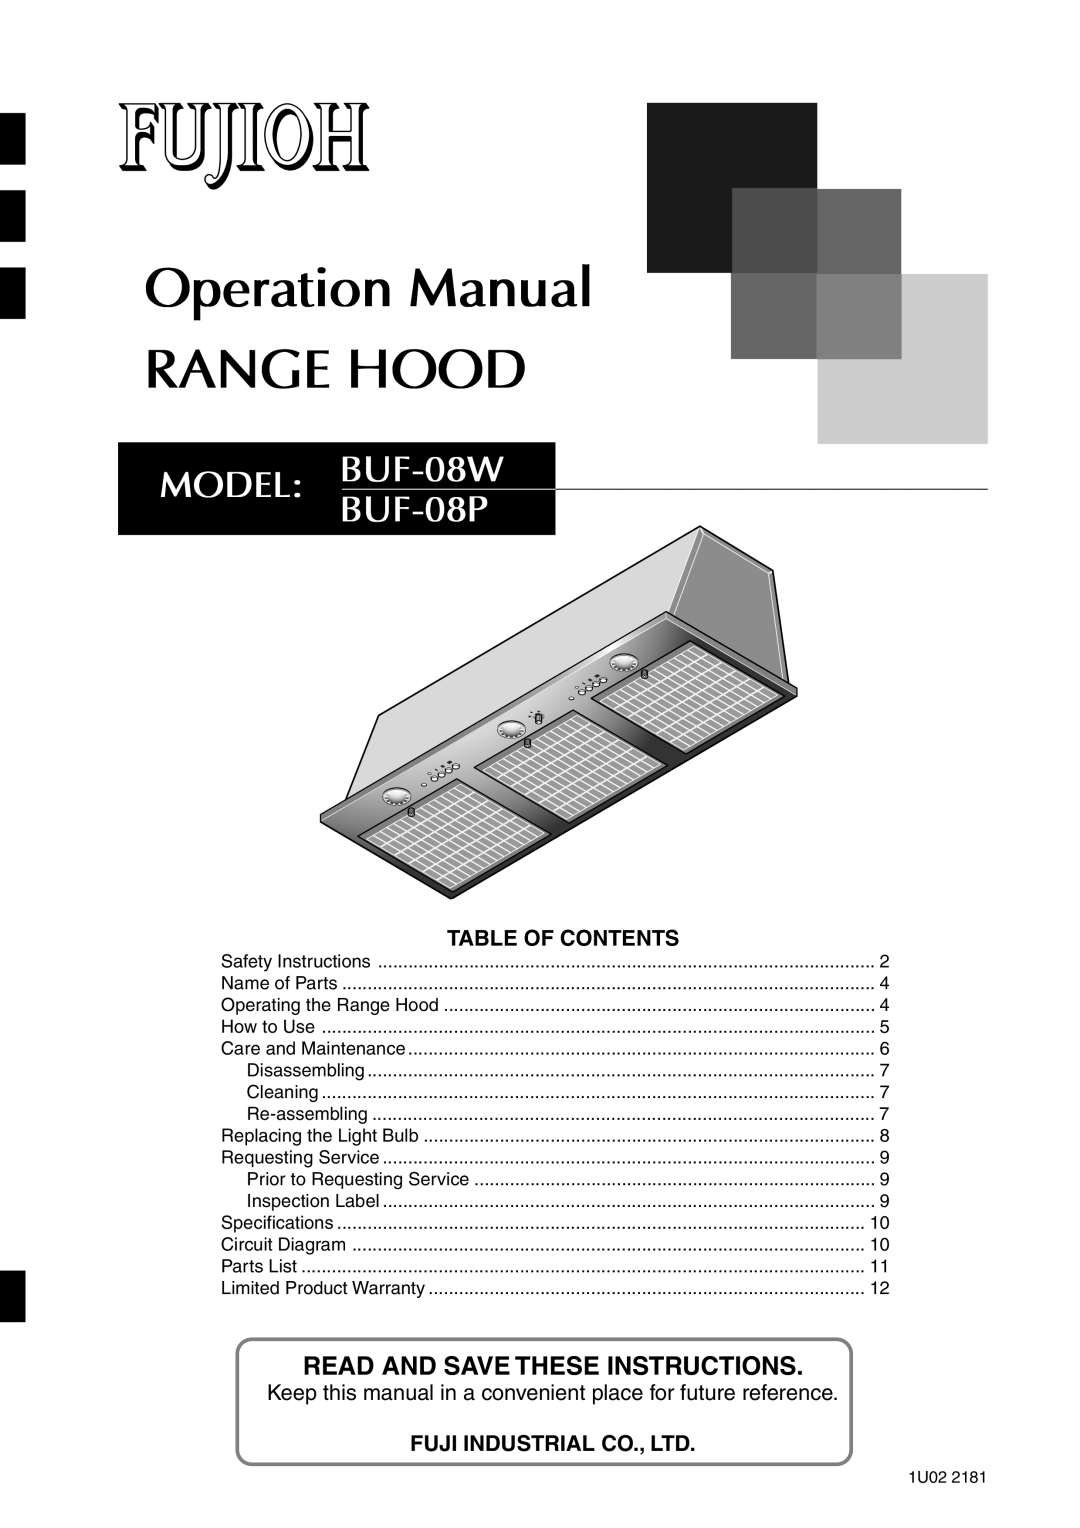 Fujioh operation manual MODEL: BUF-08W BUF-08P, Read And Save These Instructions, Table Of Contents 